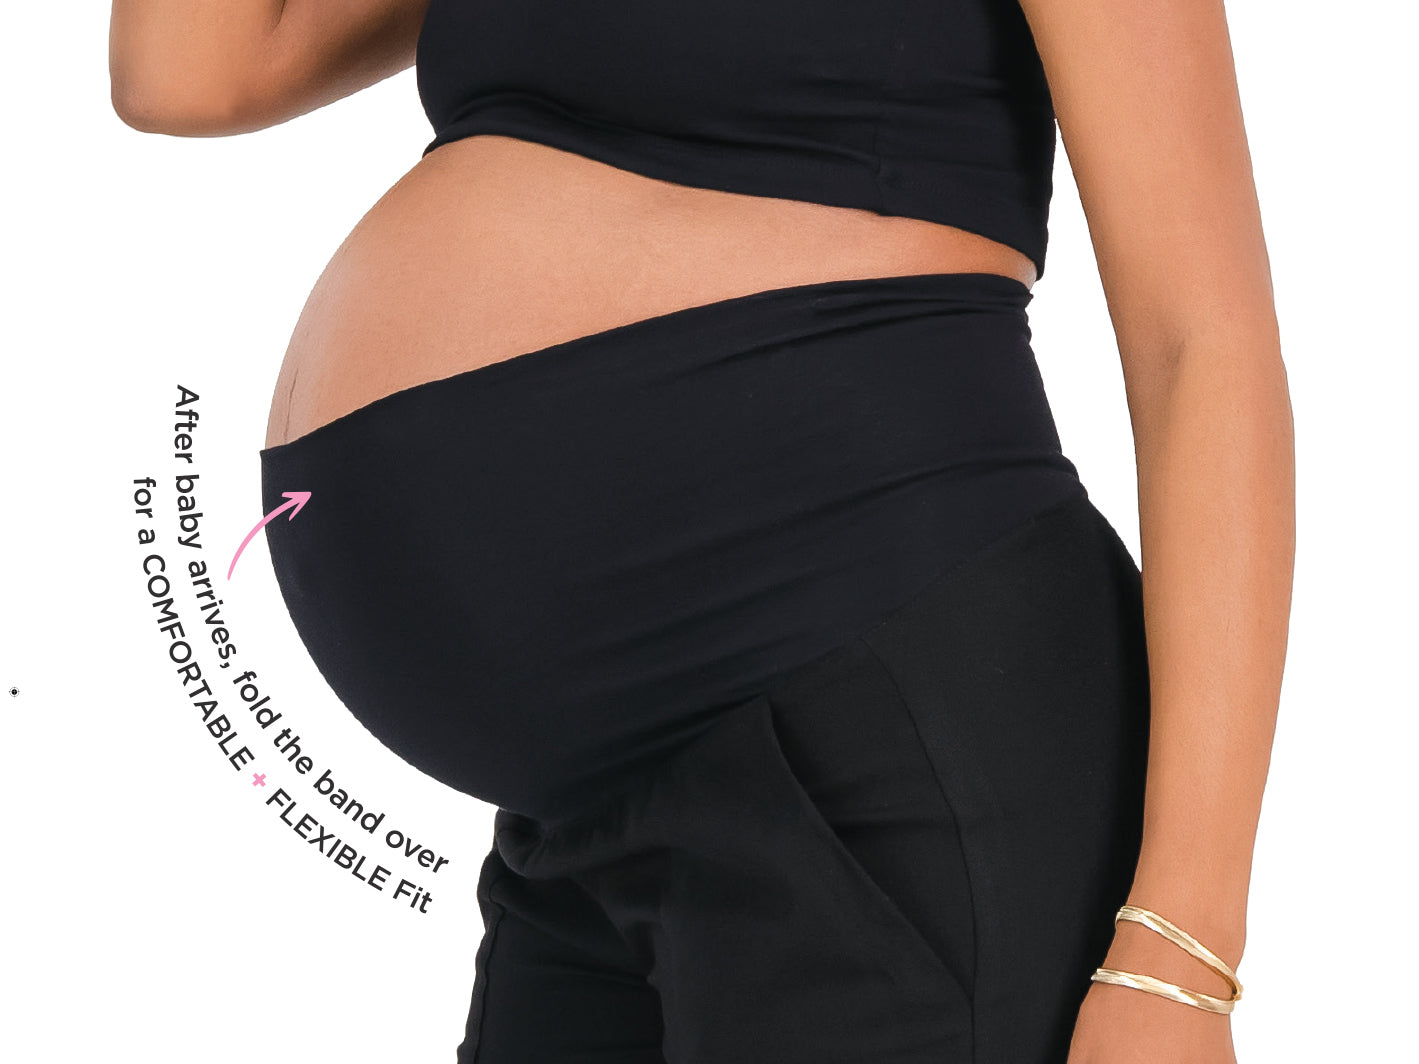 Maternity Band for a Flexible Fit